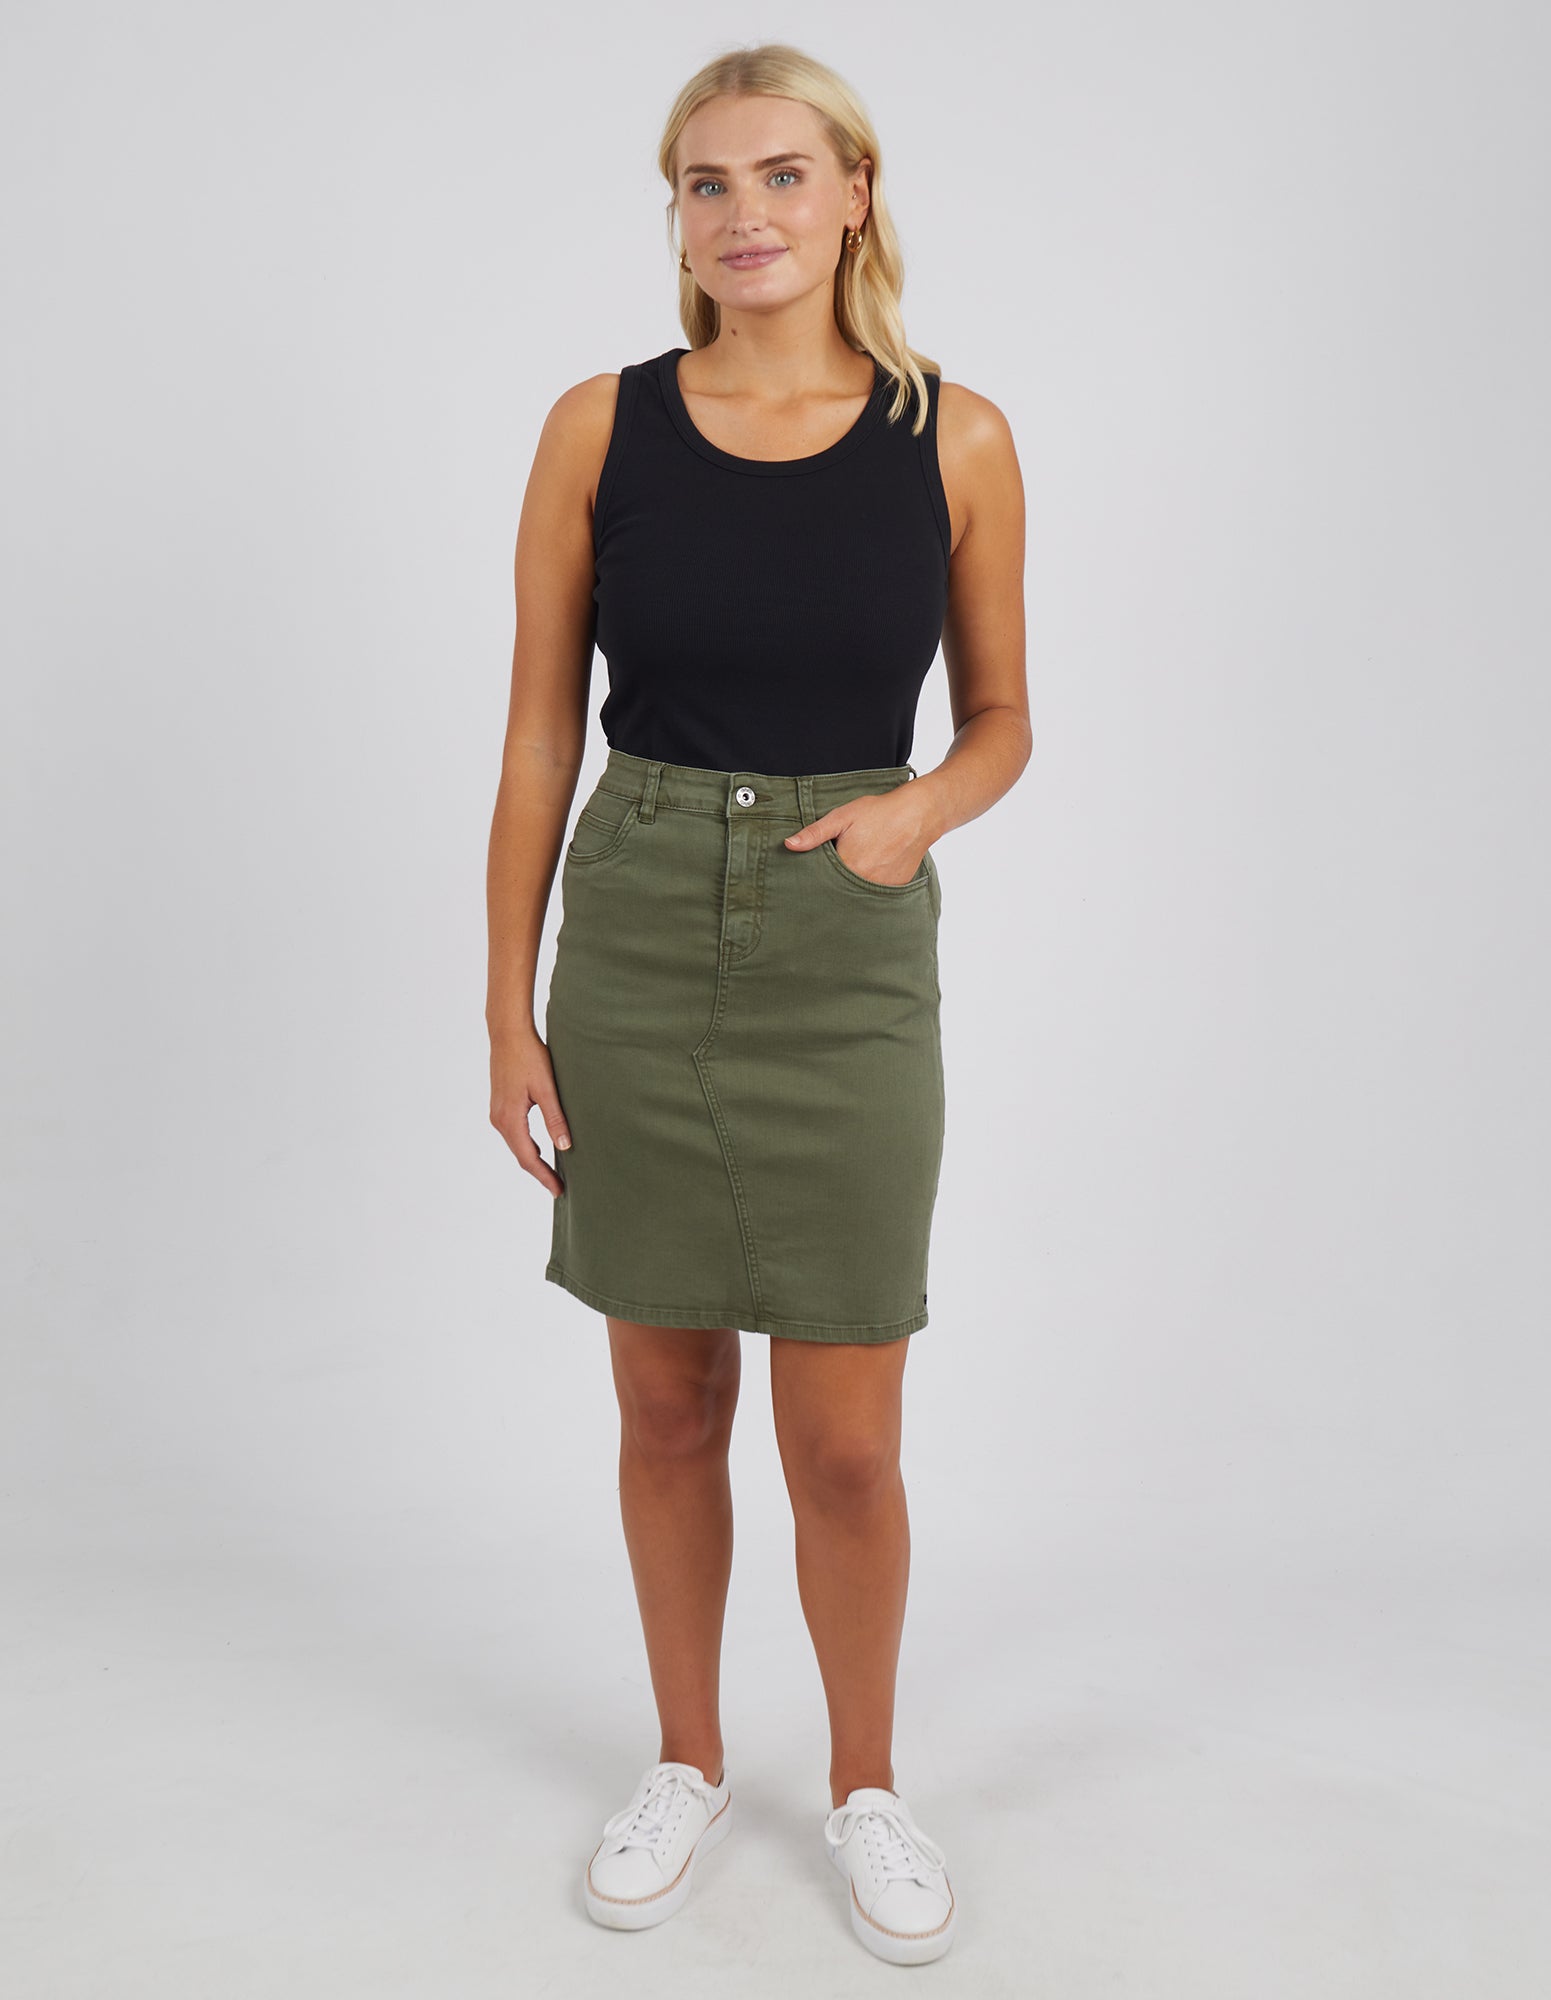 ZHANCHTONG Women's Low Waist Cargo Skirt Button Mini Cargo Denim Skirt with  Pocket (Army Green,S) at Amazon Women's Clothing store